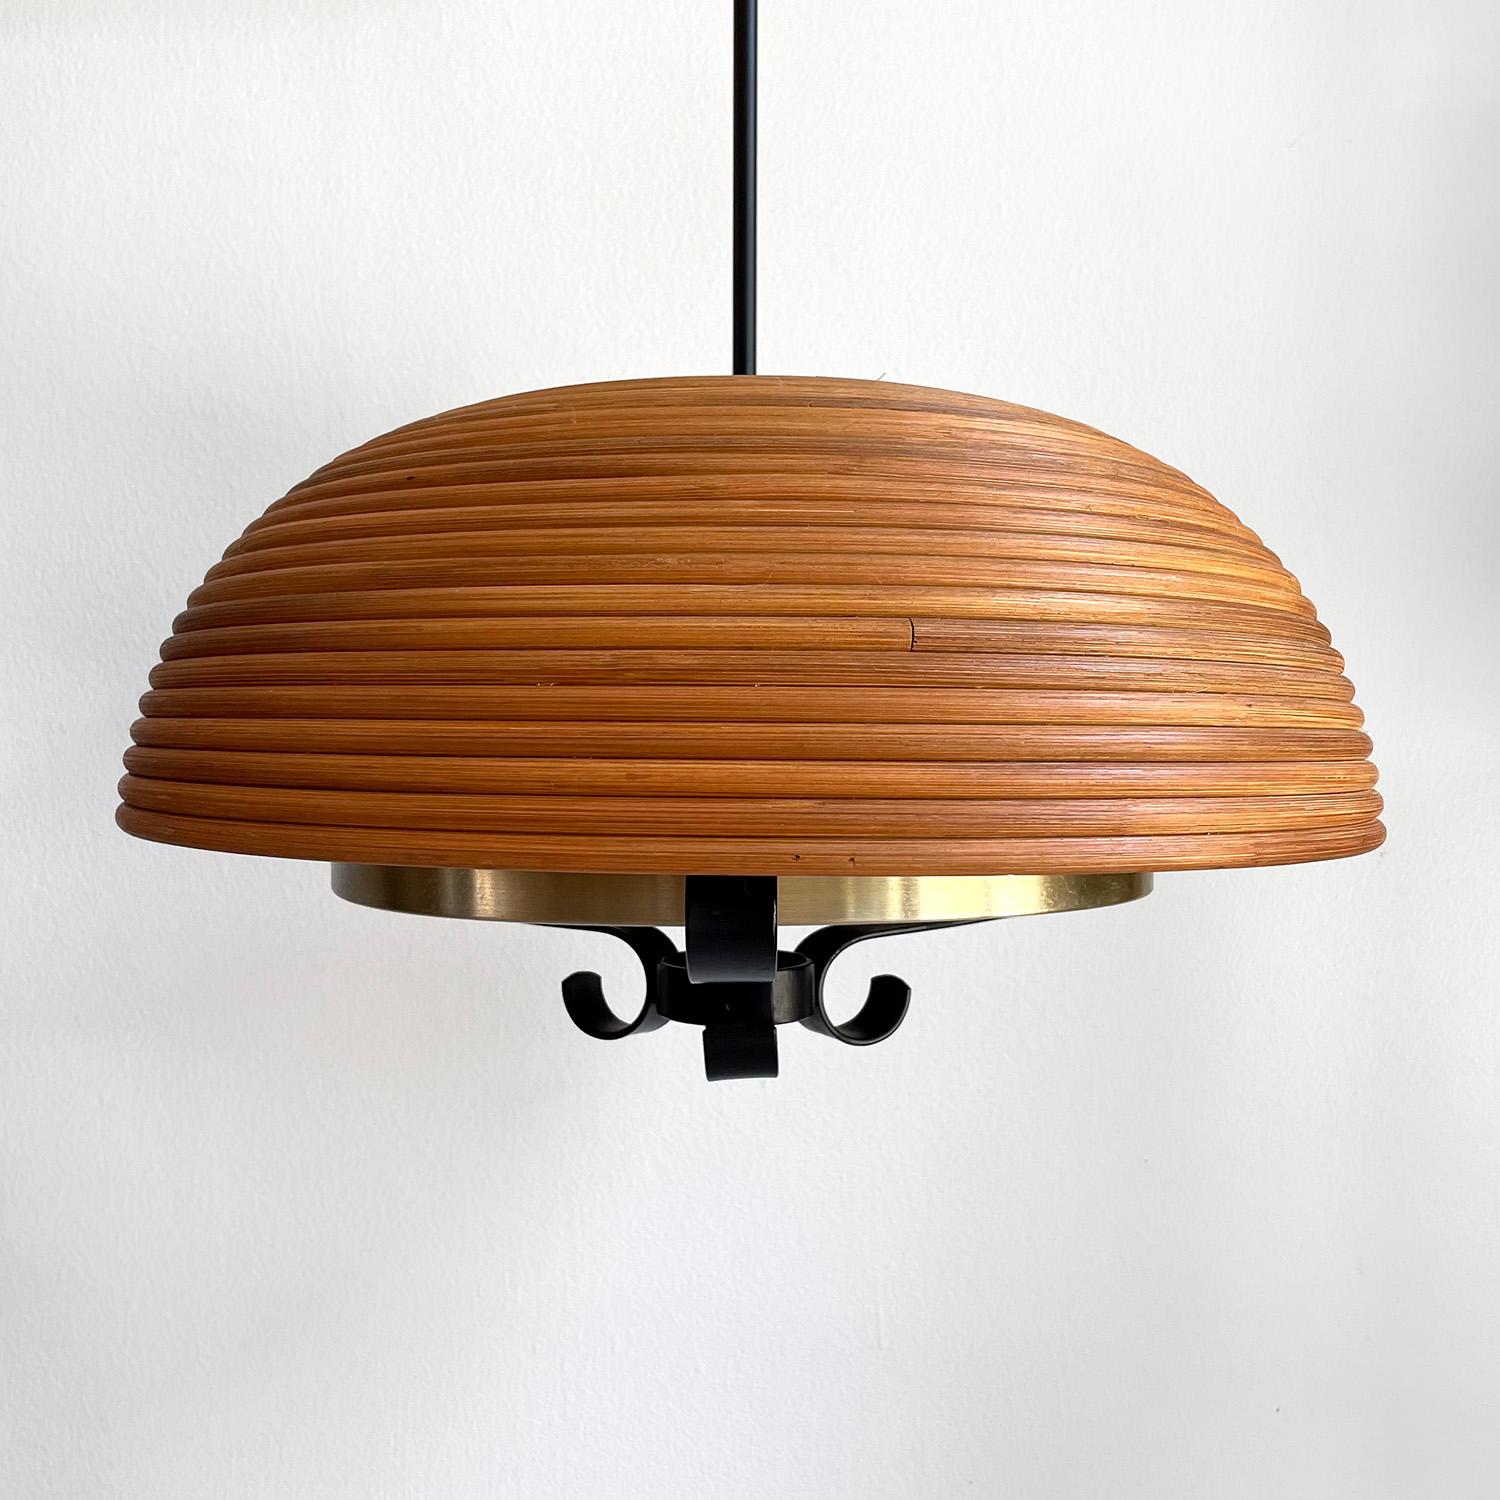 Italian Midcentury Rattan Dome Pendant Light In Good Condition For Sale In Los Angeles, CA